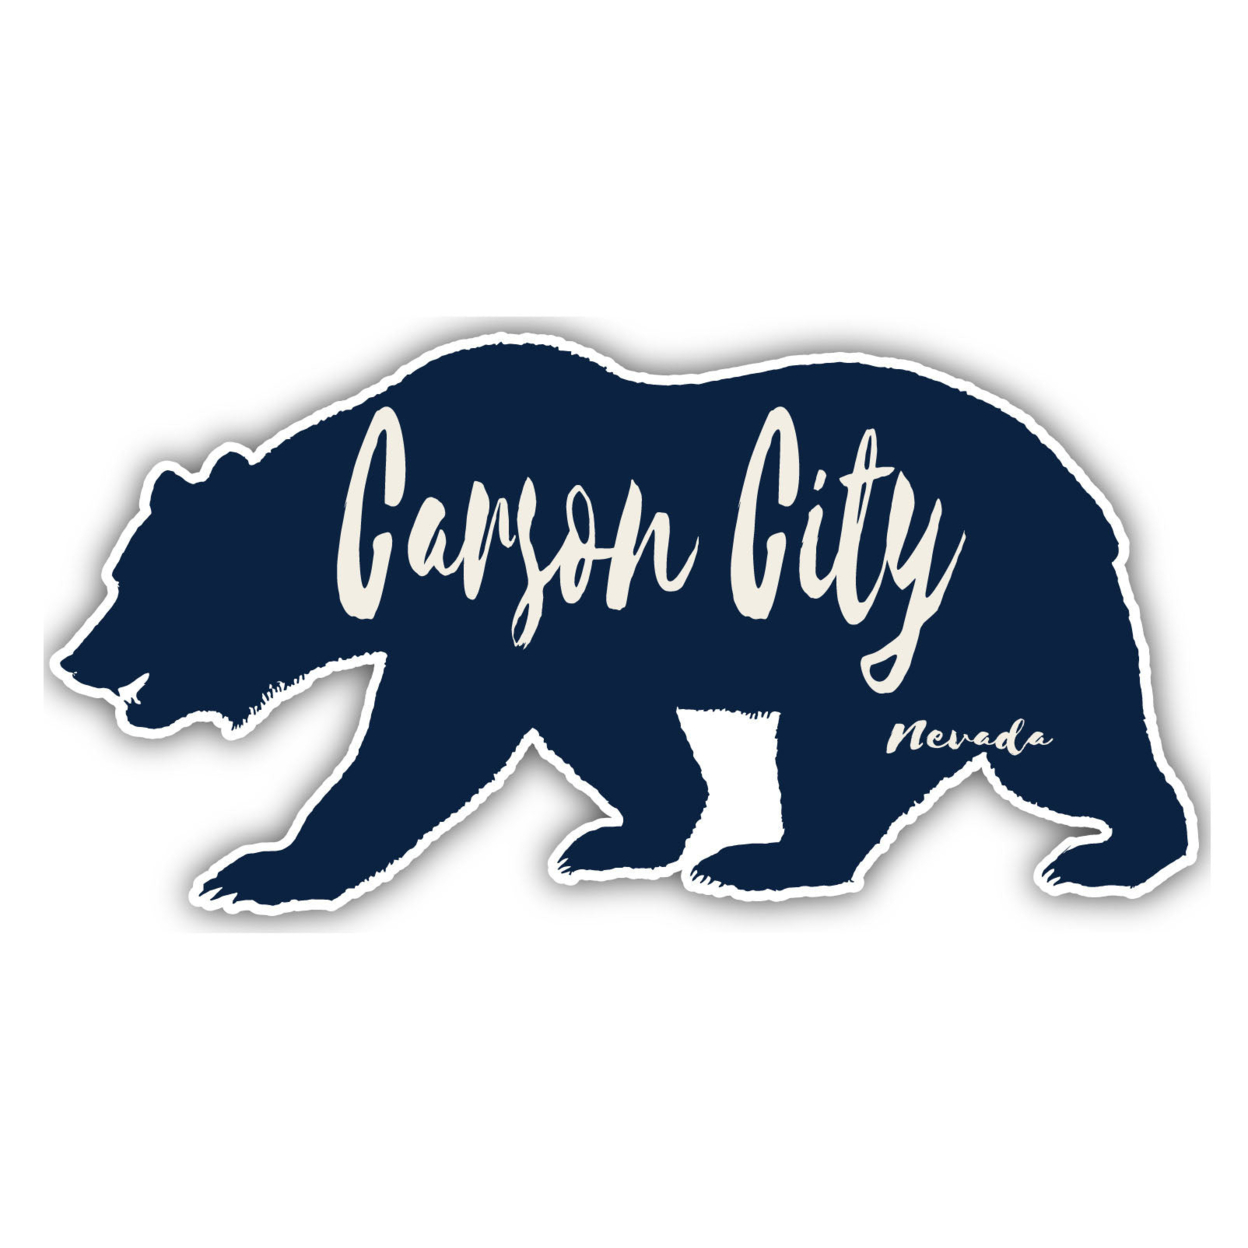 Carson City Nevada Souvenir Decorative Stickers (Choose Theme And Size) - 4-Pack, 6-Inch, Tent